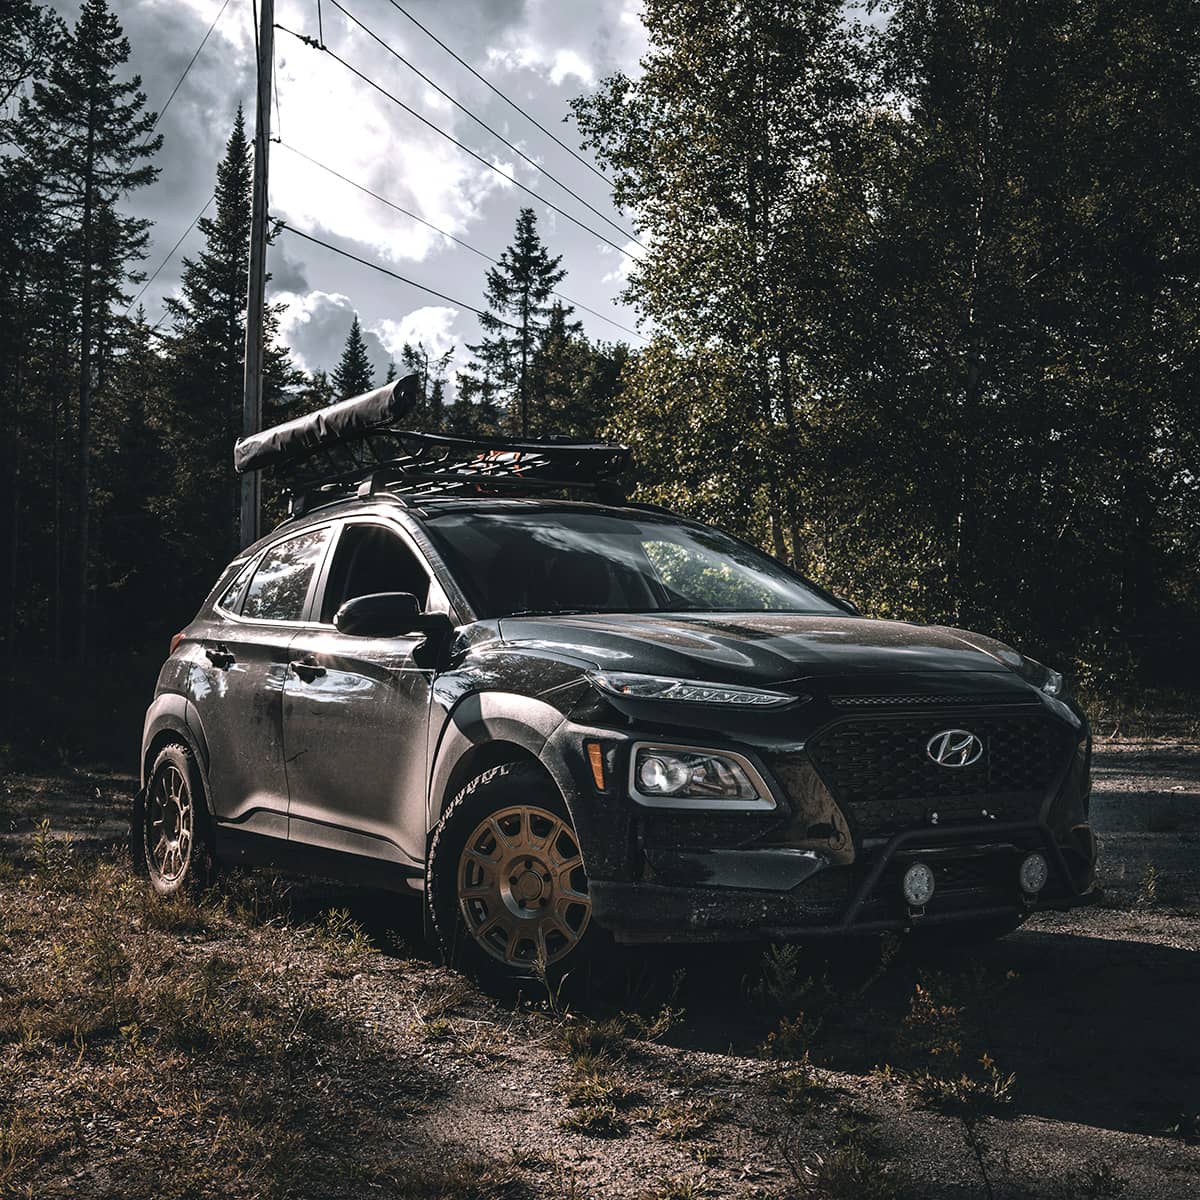 Lifted Hyundai Kona with off-road modifications